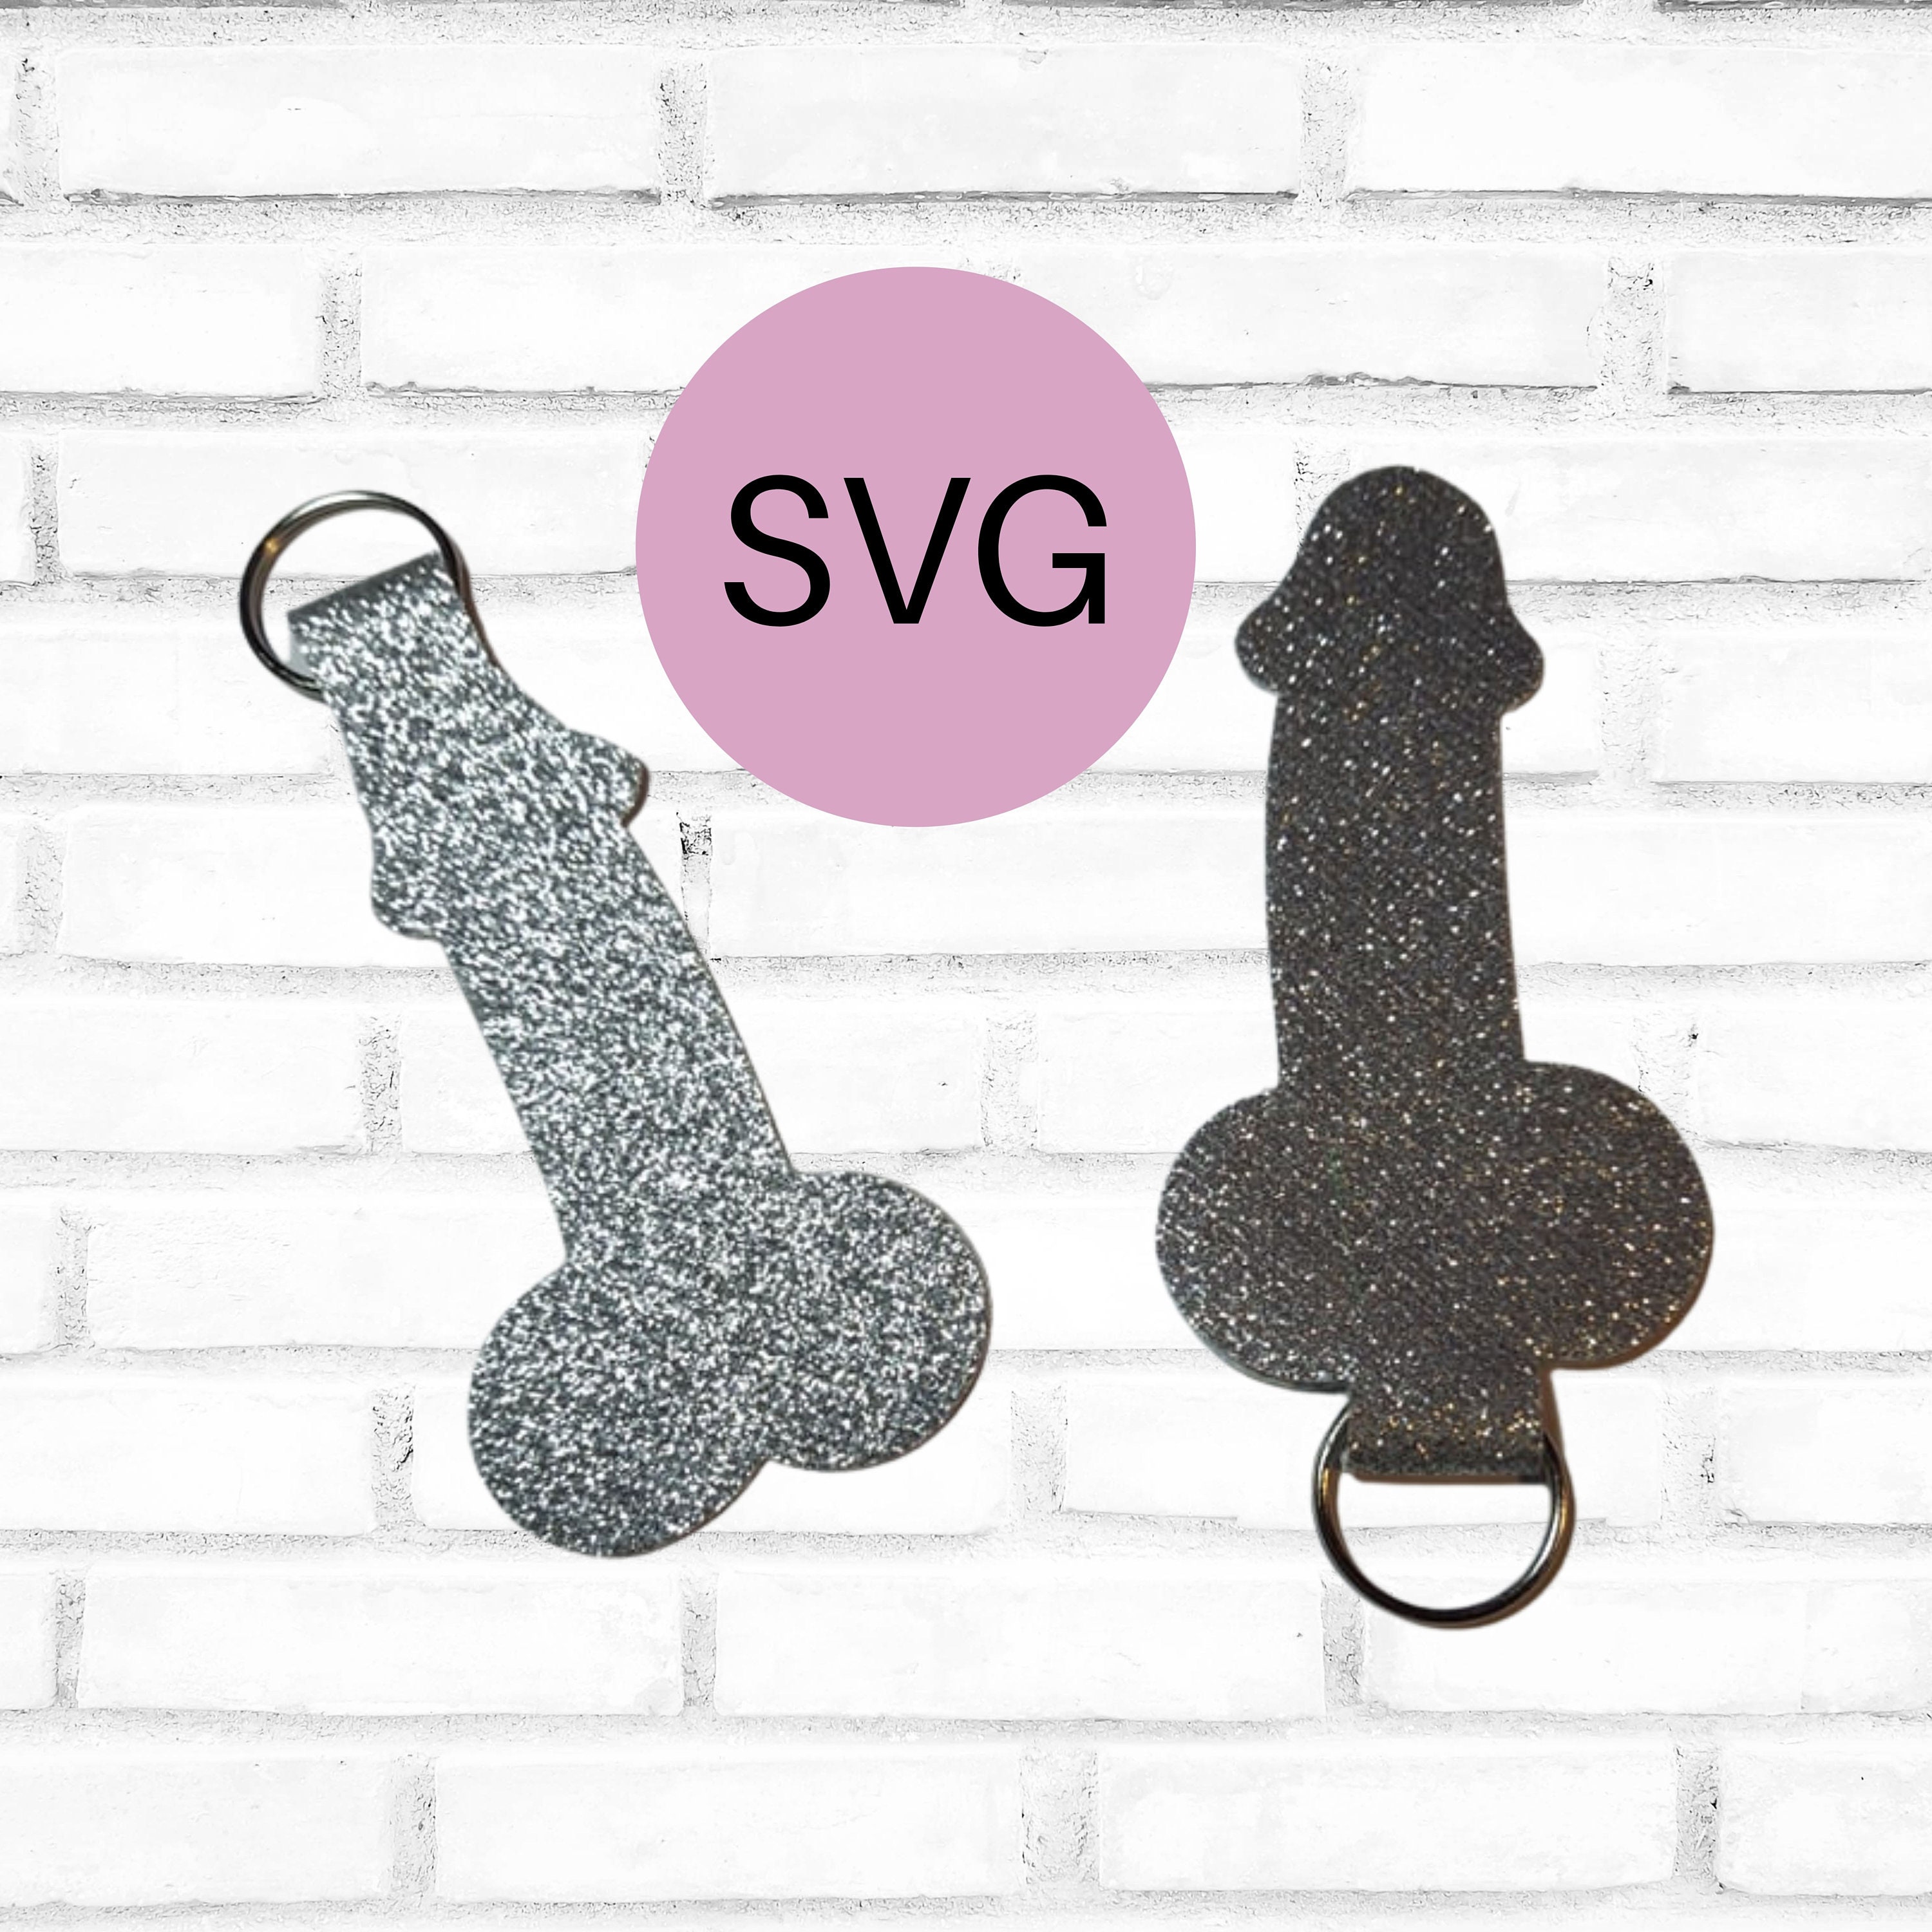 Penis keychain SVG Key fob template Cut file for Cricut and | Etsy